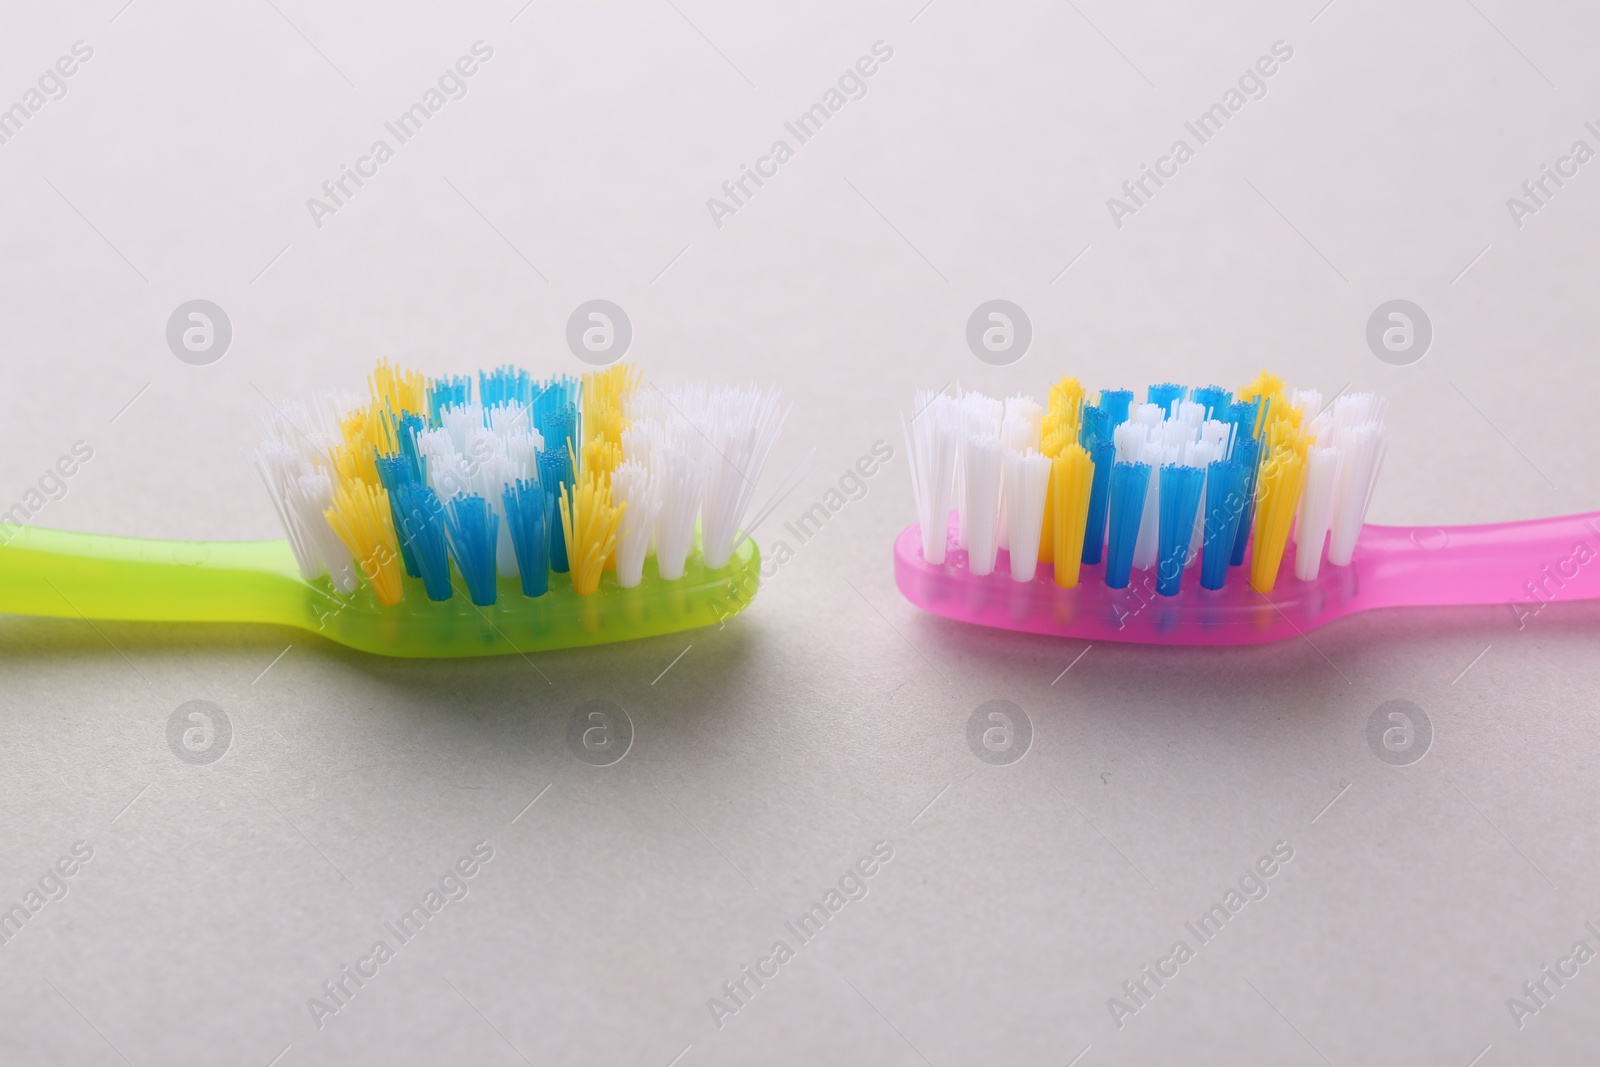 Photo of Colorful plastic toothbrushes on light background, closeup